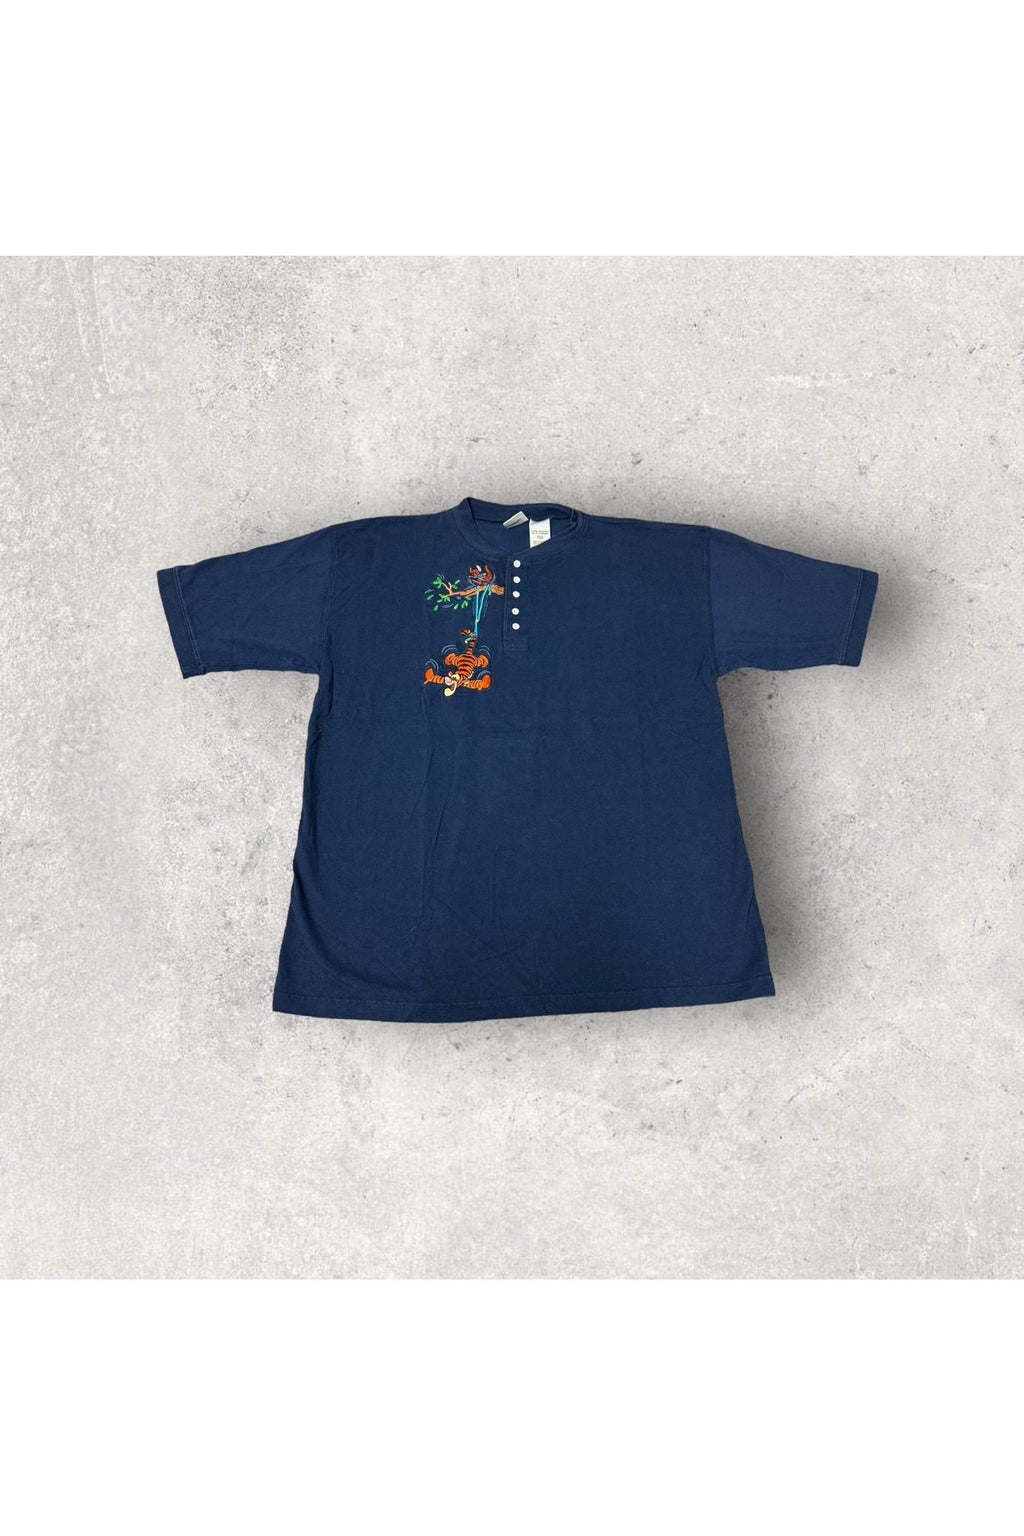 2000s The Disney Store Embroidered Tigger Button Up Tee- XL